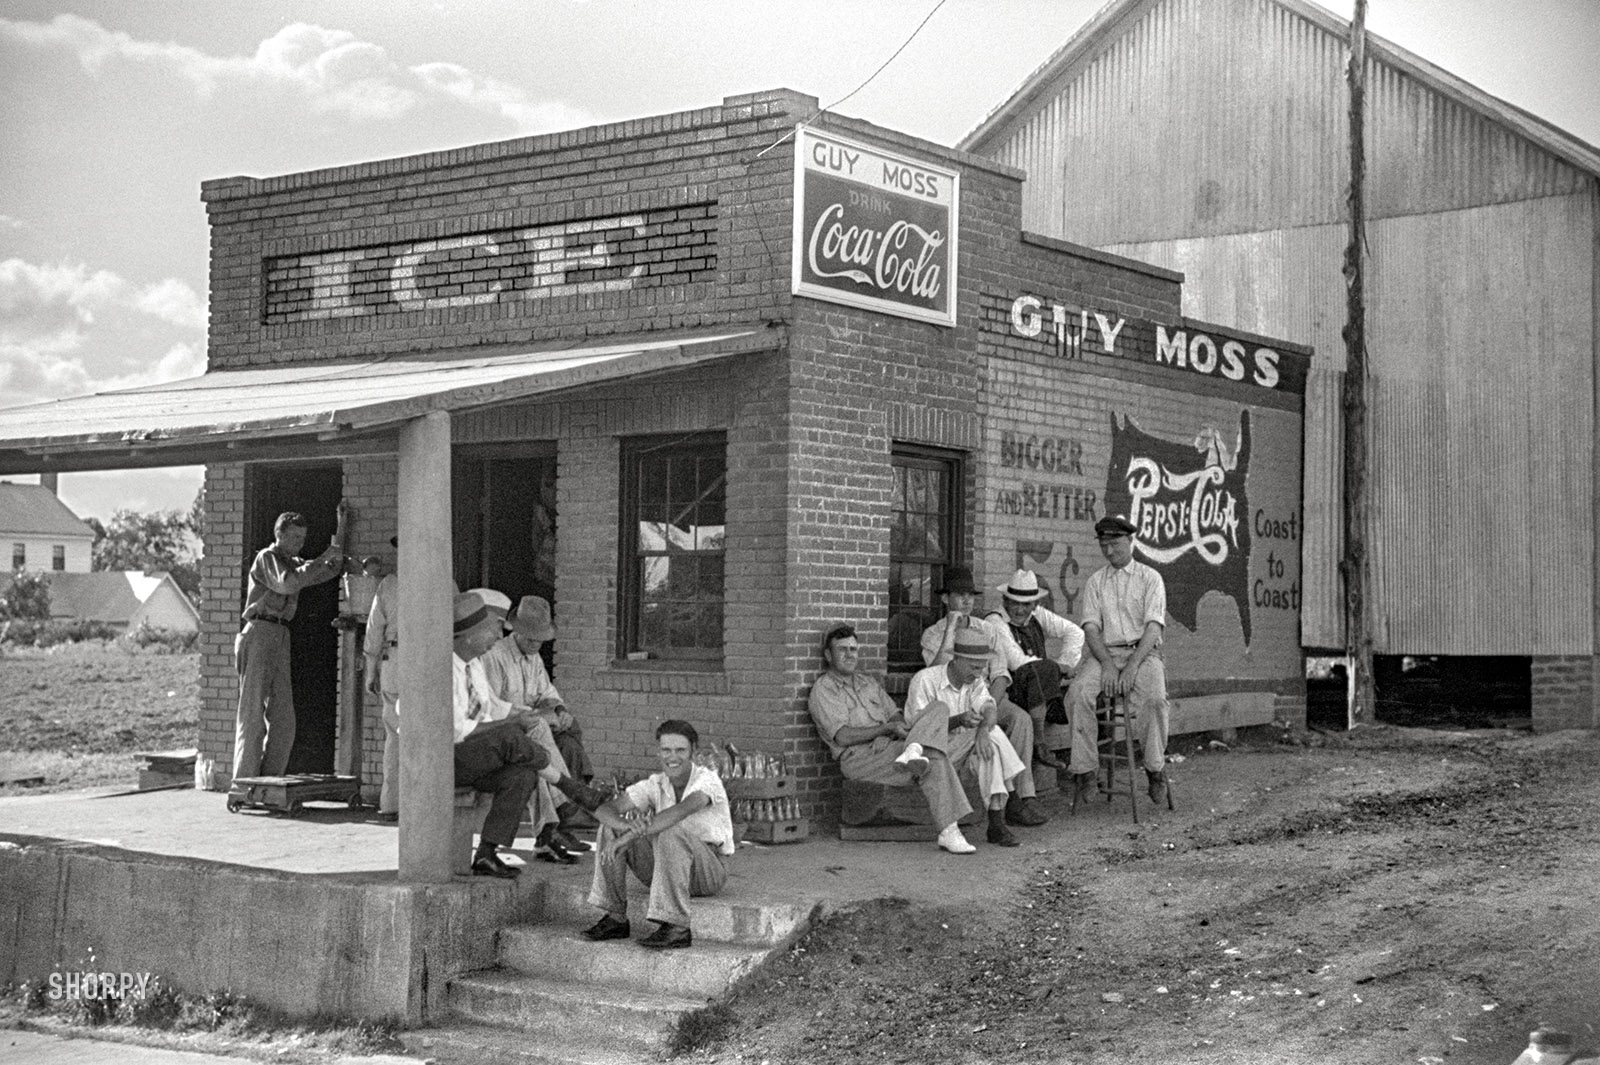 June 1939. Greene County, Georgia. "Men hanging around crossroads store." 35mm negative by Marion Post Wolcott for the FSA. View full size.